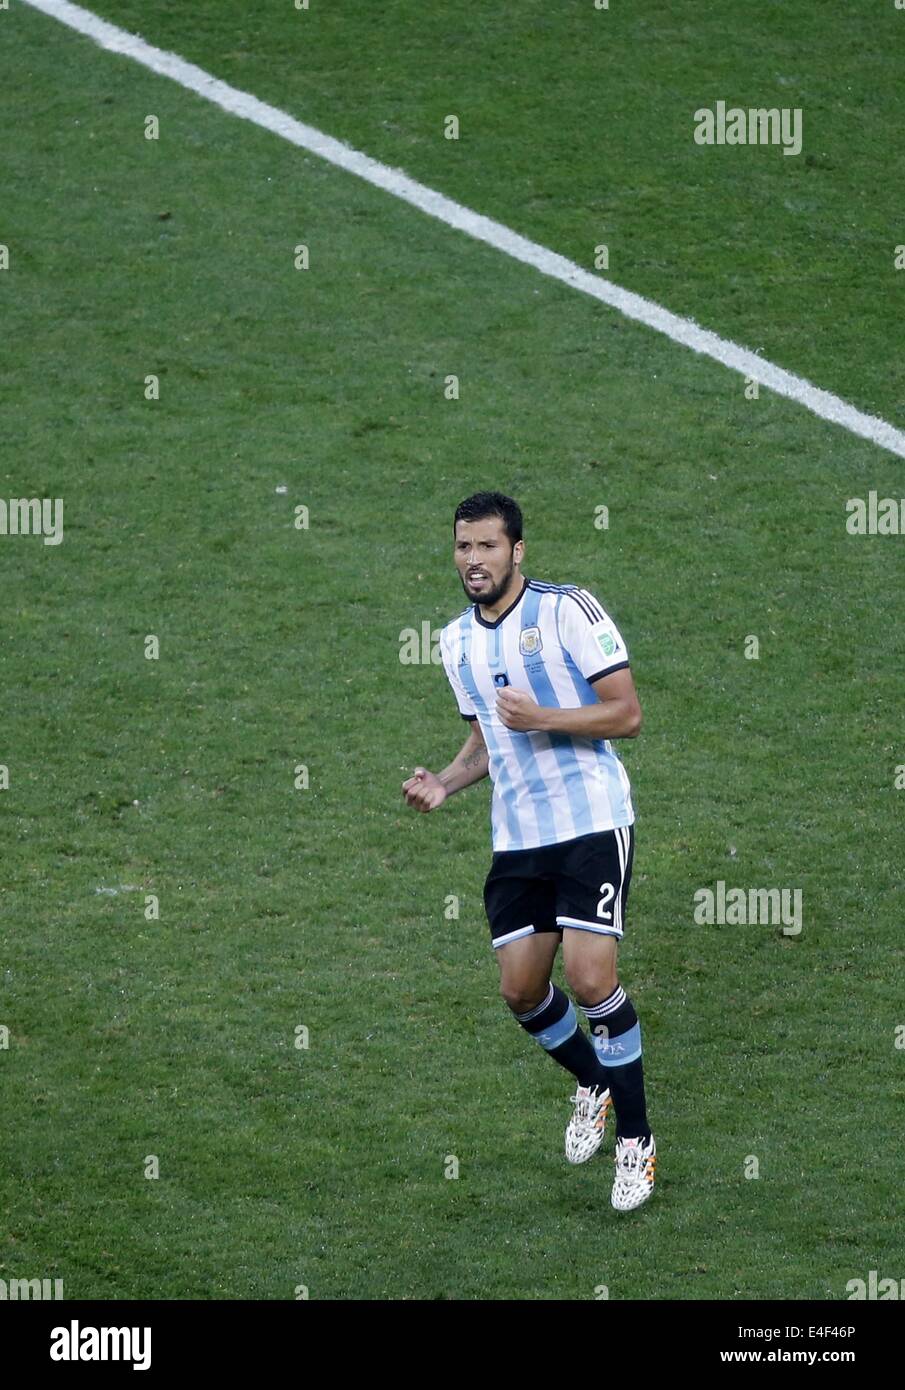 Sao Paulo, Brazil. 9th July, 2014. Argentina's Ezequiel Garay celebrates a penalty goal during the penalty shoot-out of a semifinal match between Netherlands and Argentina of 2014 FIFA World Cup at the Arena de Sao Paulo Stadium in Sao Paulo, Brazil, on July 9, 2014. Argentina won 4-2 on penalties over Netherlands after a 0-0 tie and qualified for the final on Wednesday. Credit:  Liao Yujie/Xinhua/Alamy Live News Stock Photo